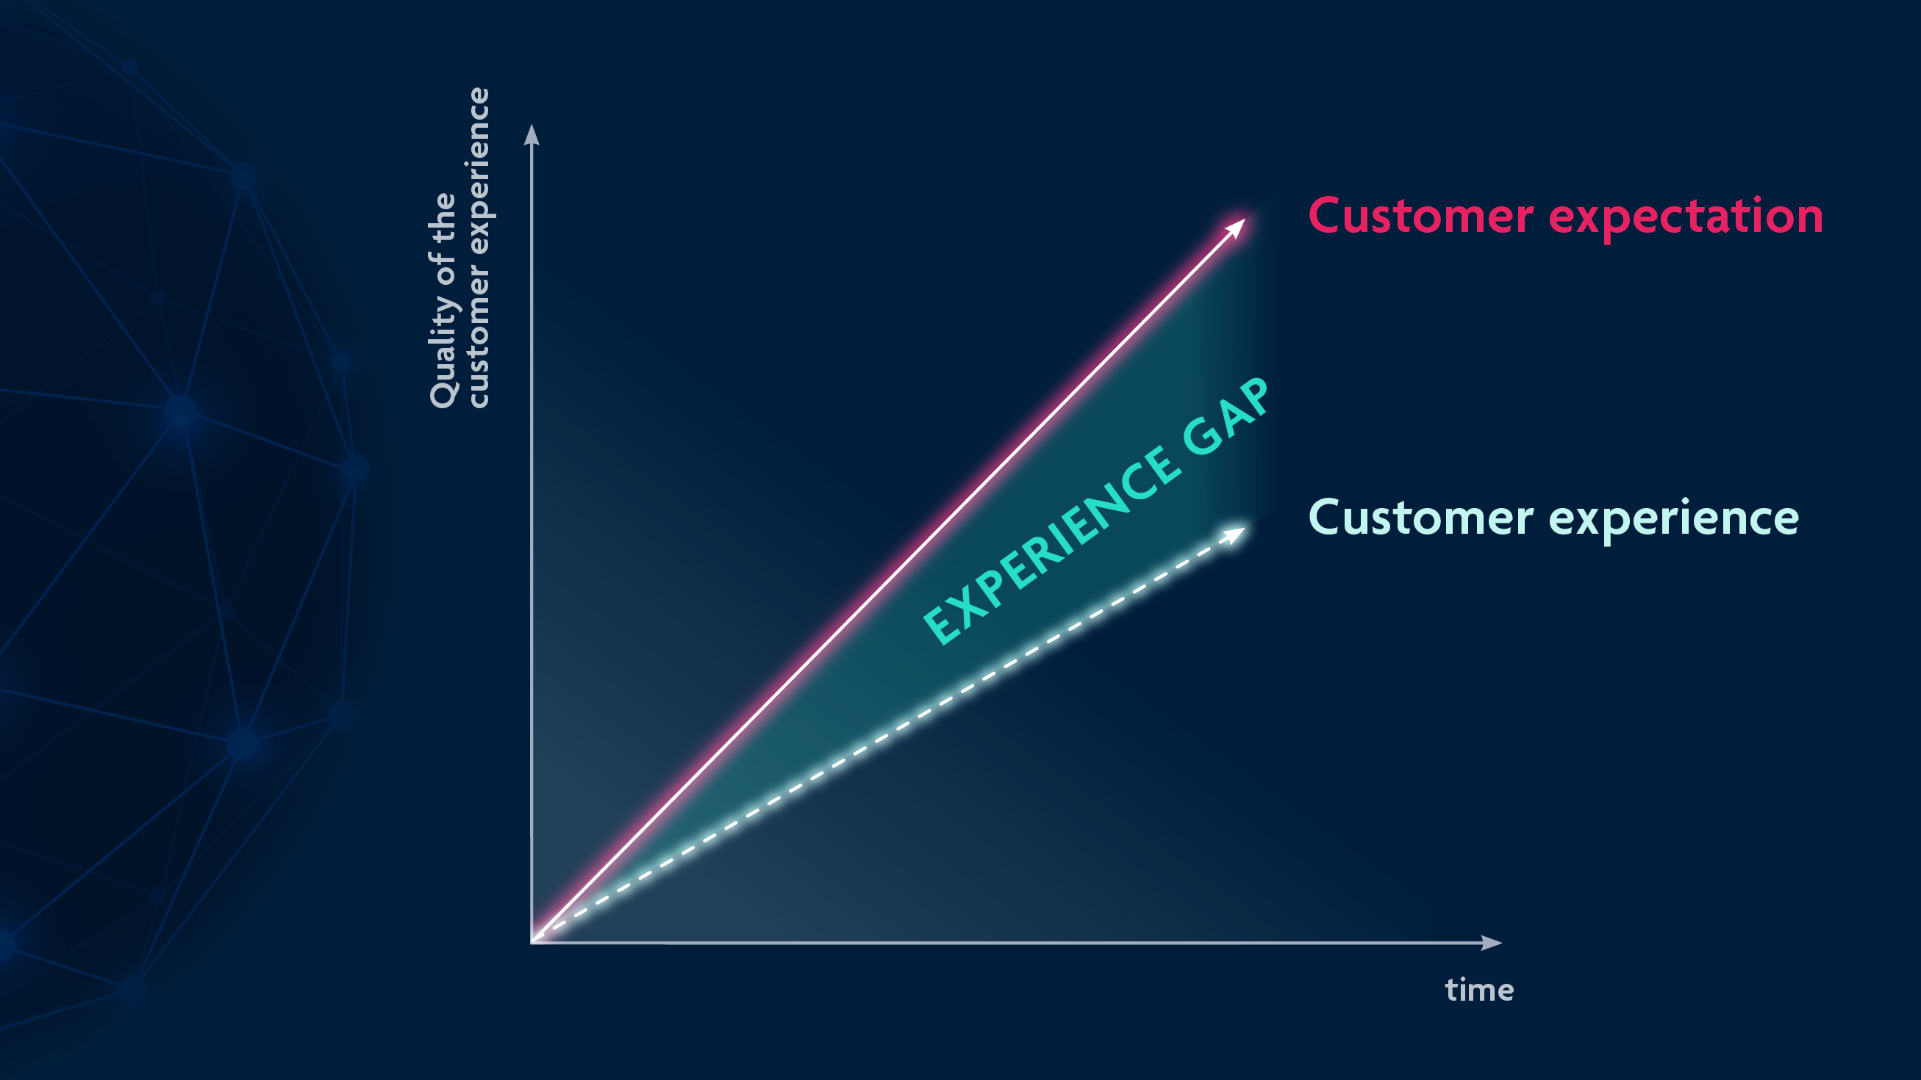 Experience Gap between customer expectation and customer experience